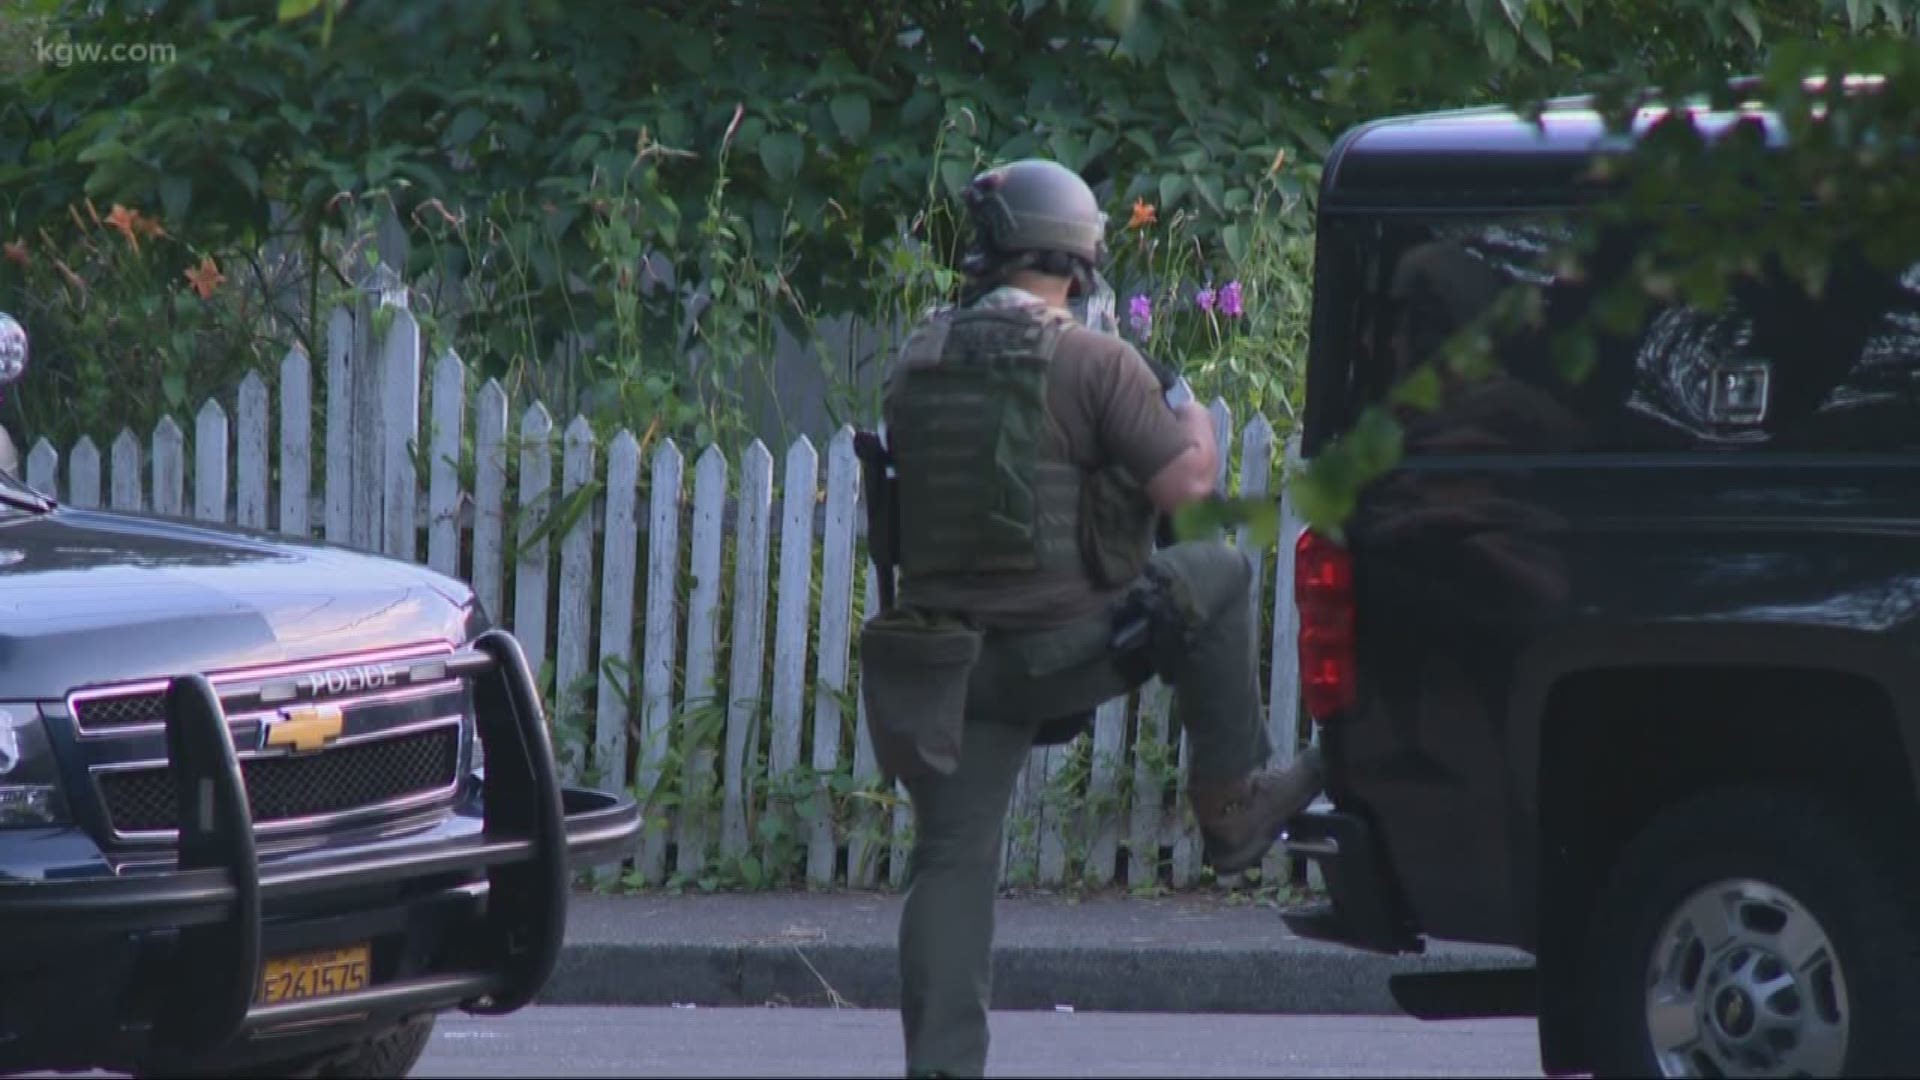 Authorities are searching for an armed suspect who ran away from a traffic stop in Southeast Portland on Saturday.